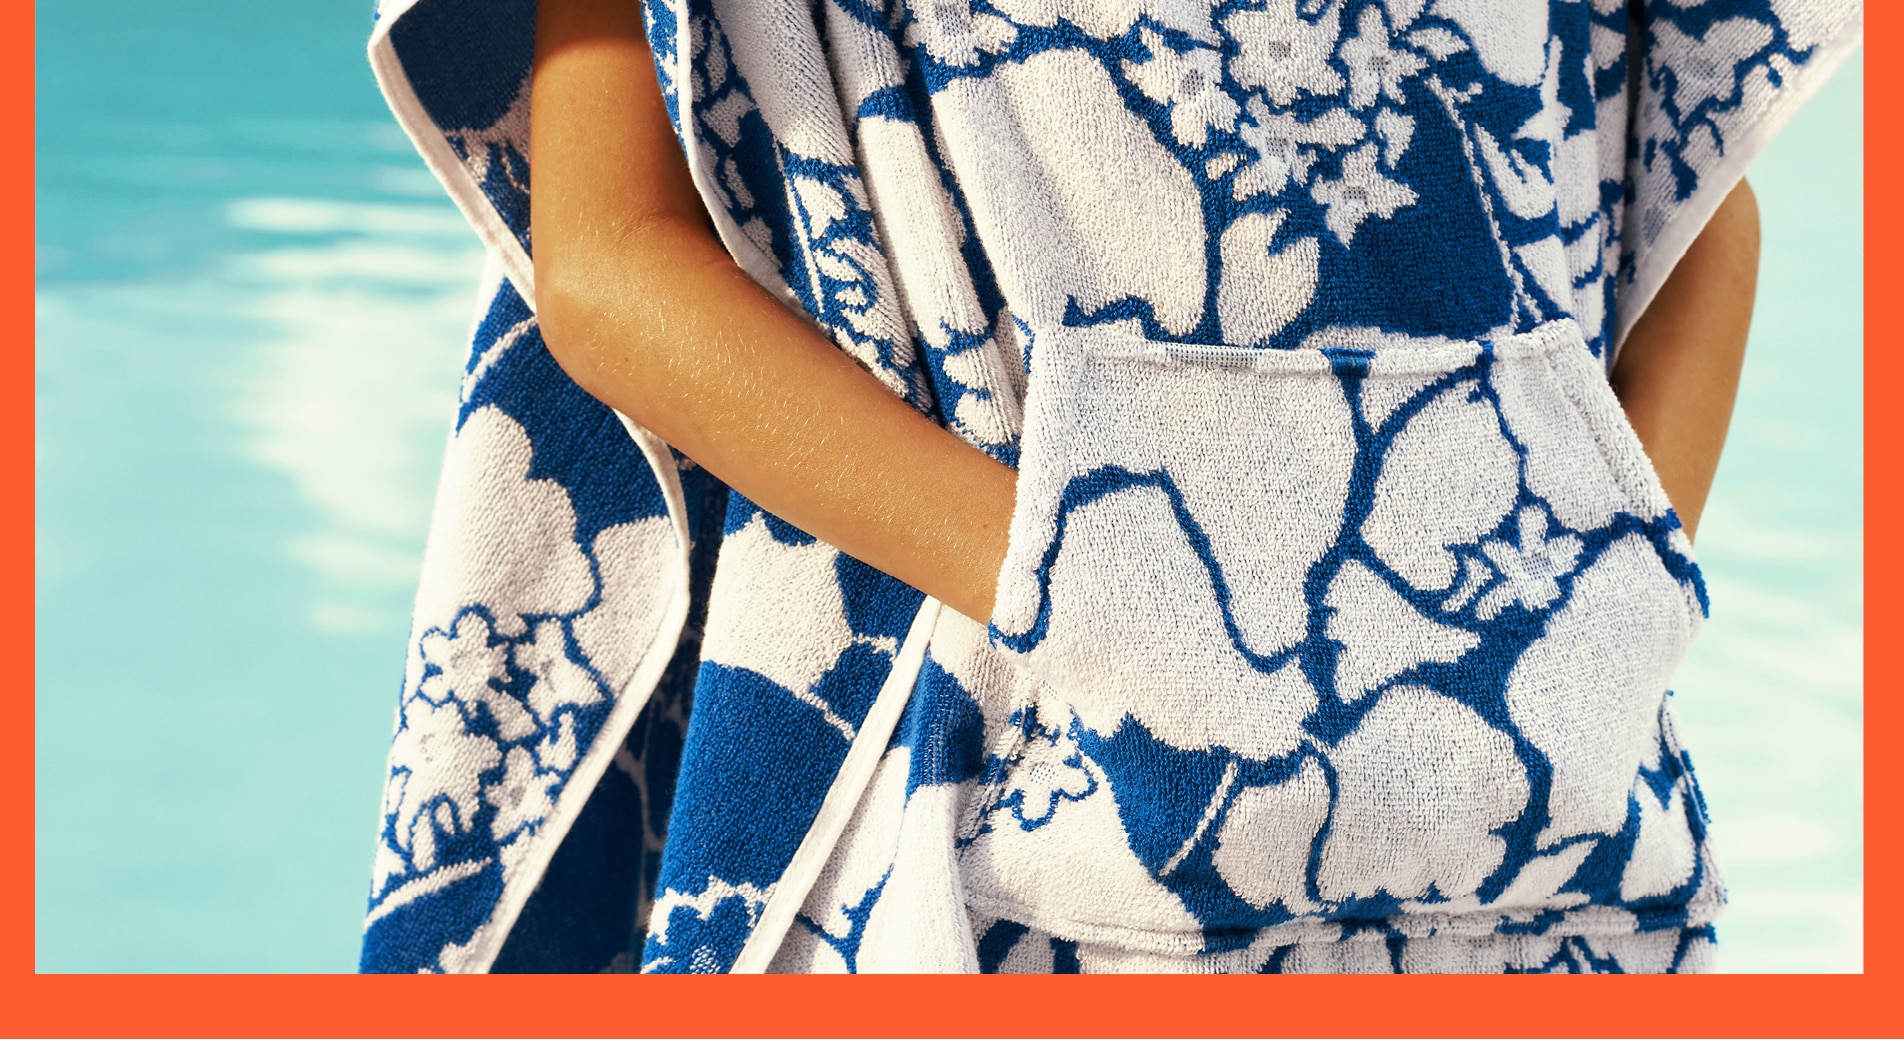 close up of child standing in pool, wearing a white and blue poncho, with hands in pocket. an orange border surrounds image on three sides.